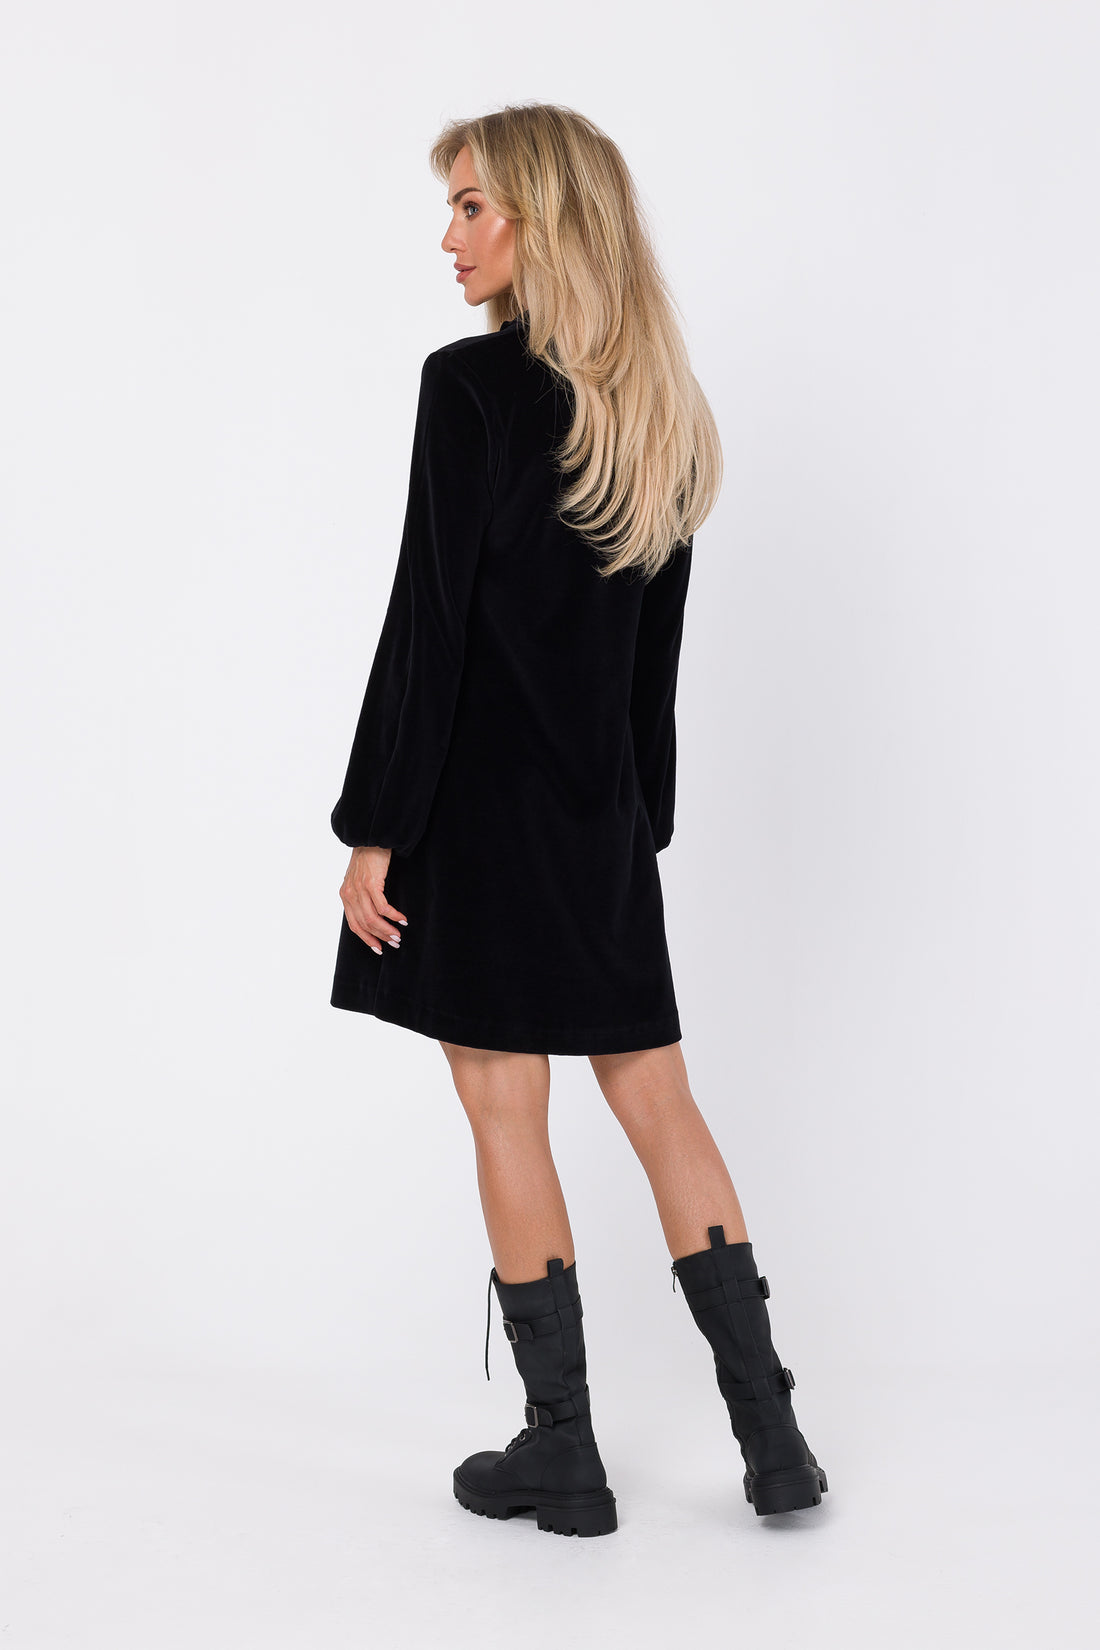 Velvet Mini Dress V-neck | Strictly In | Perfect for casual outings or evening events, pair it with ankle boots for a laid-back vibe or strappy heels for a more polished look. 